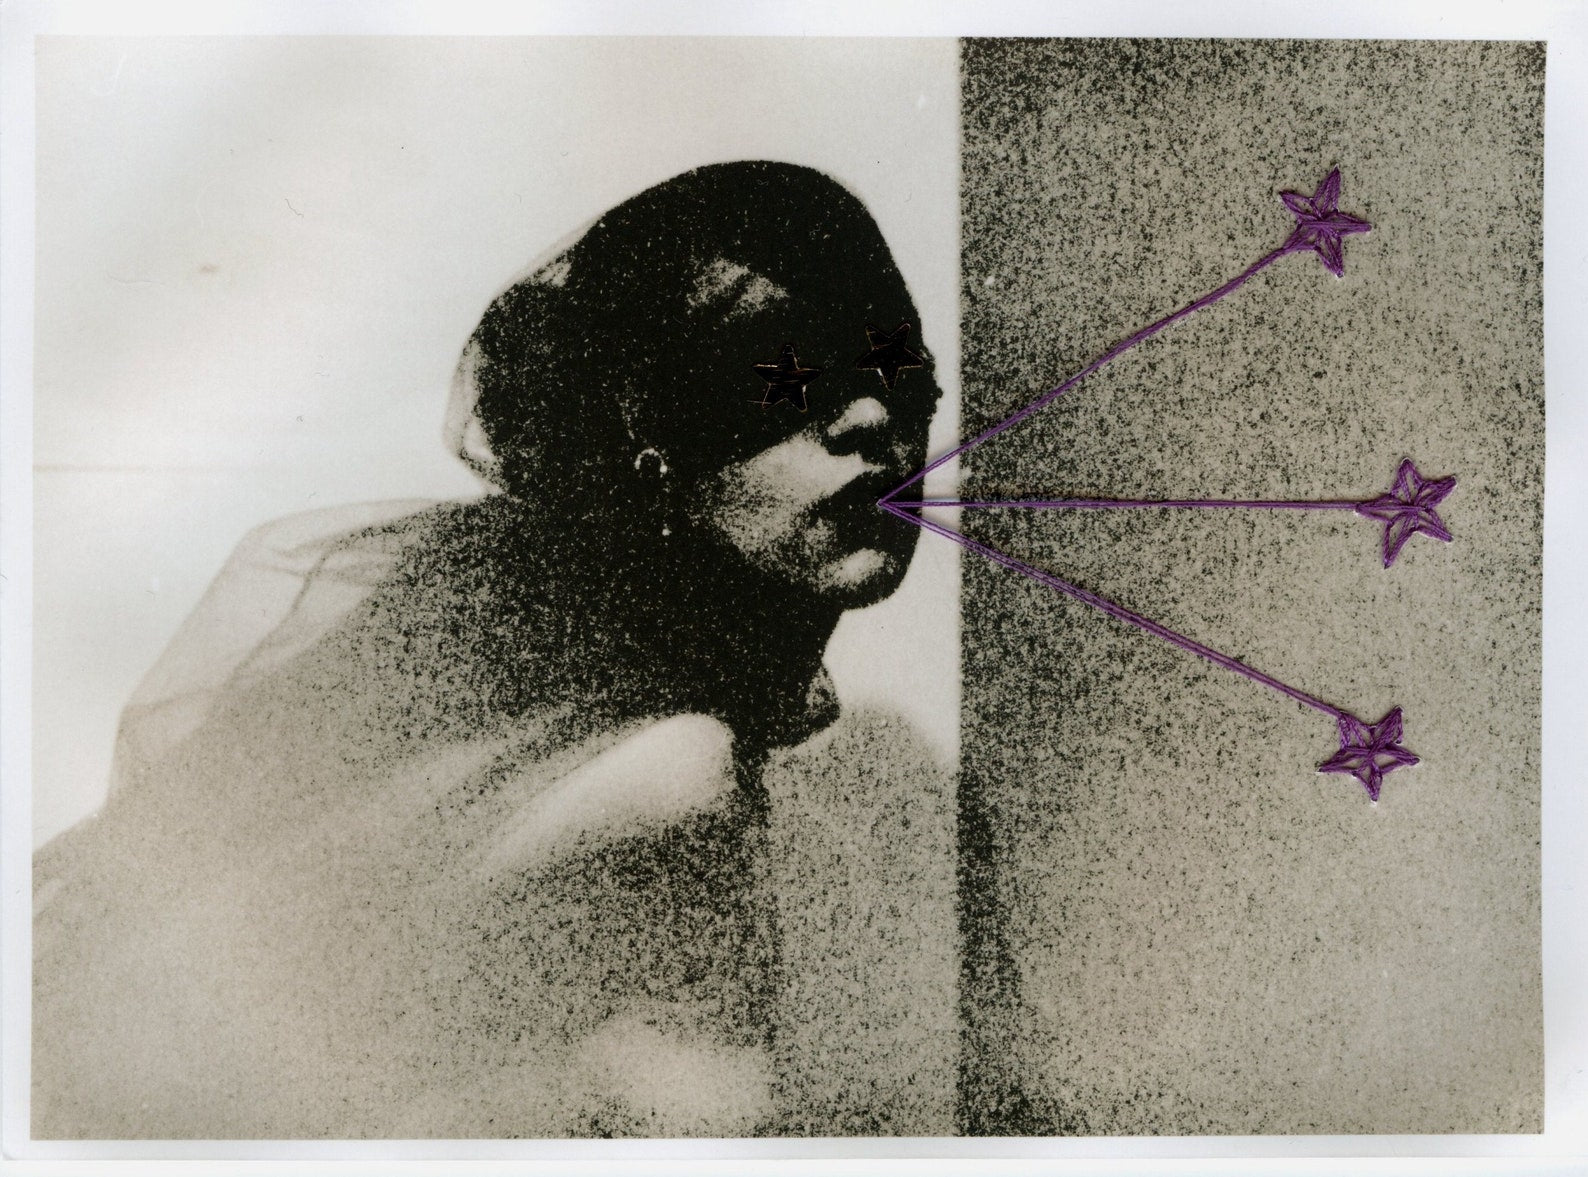 A black and white photographic print of a young woman with her eyes covered and three purple stars shooting from her mouth